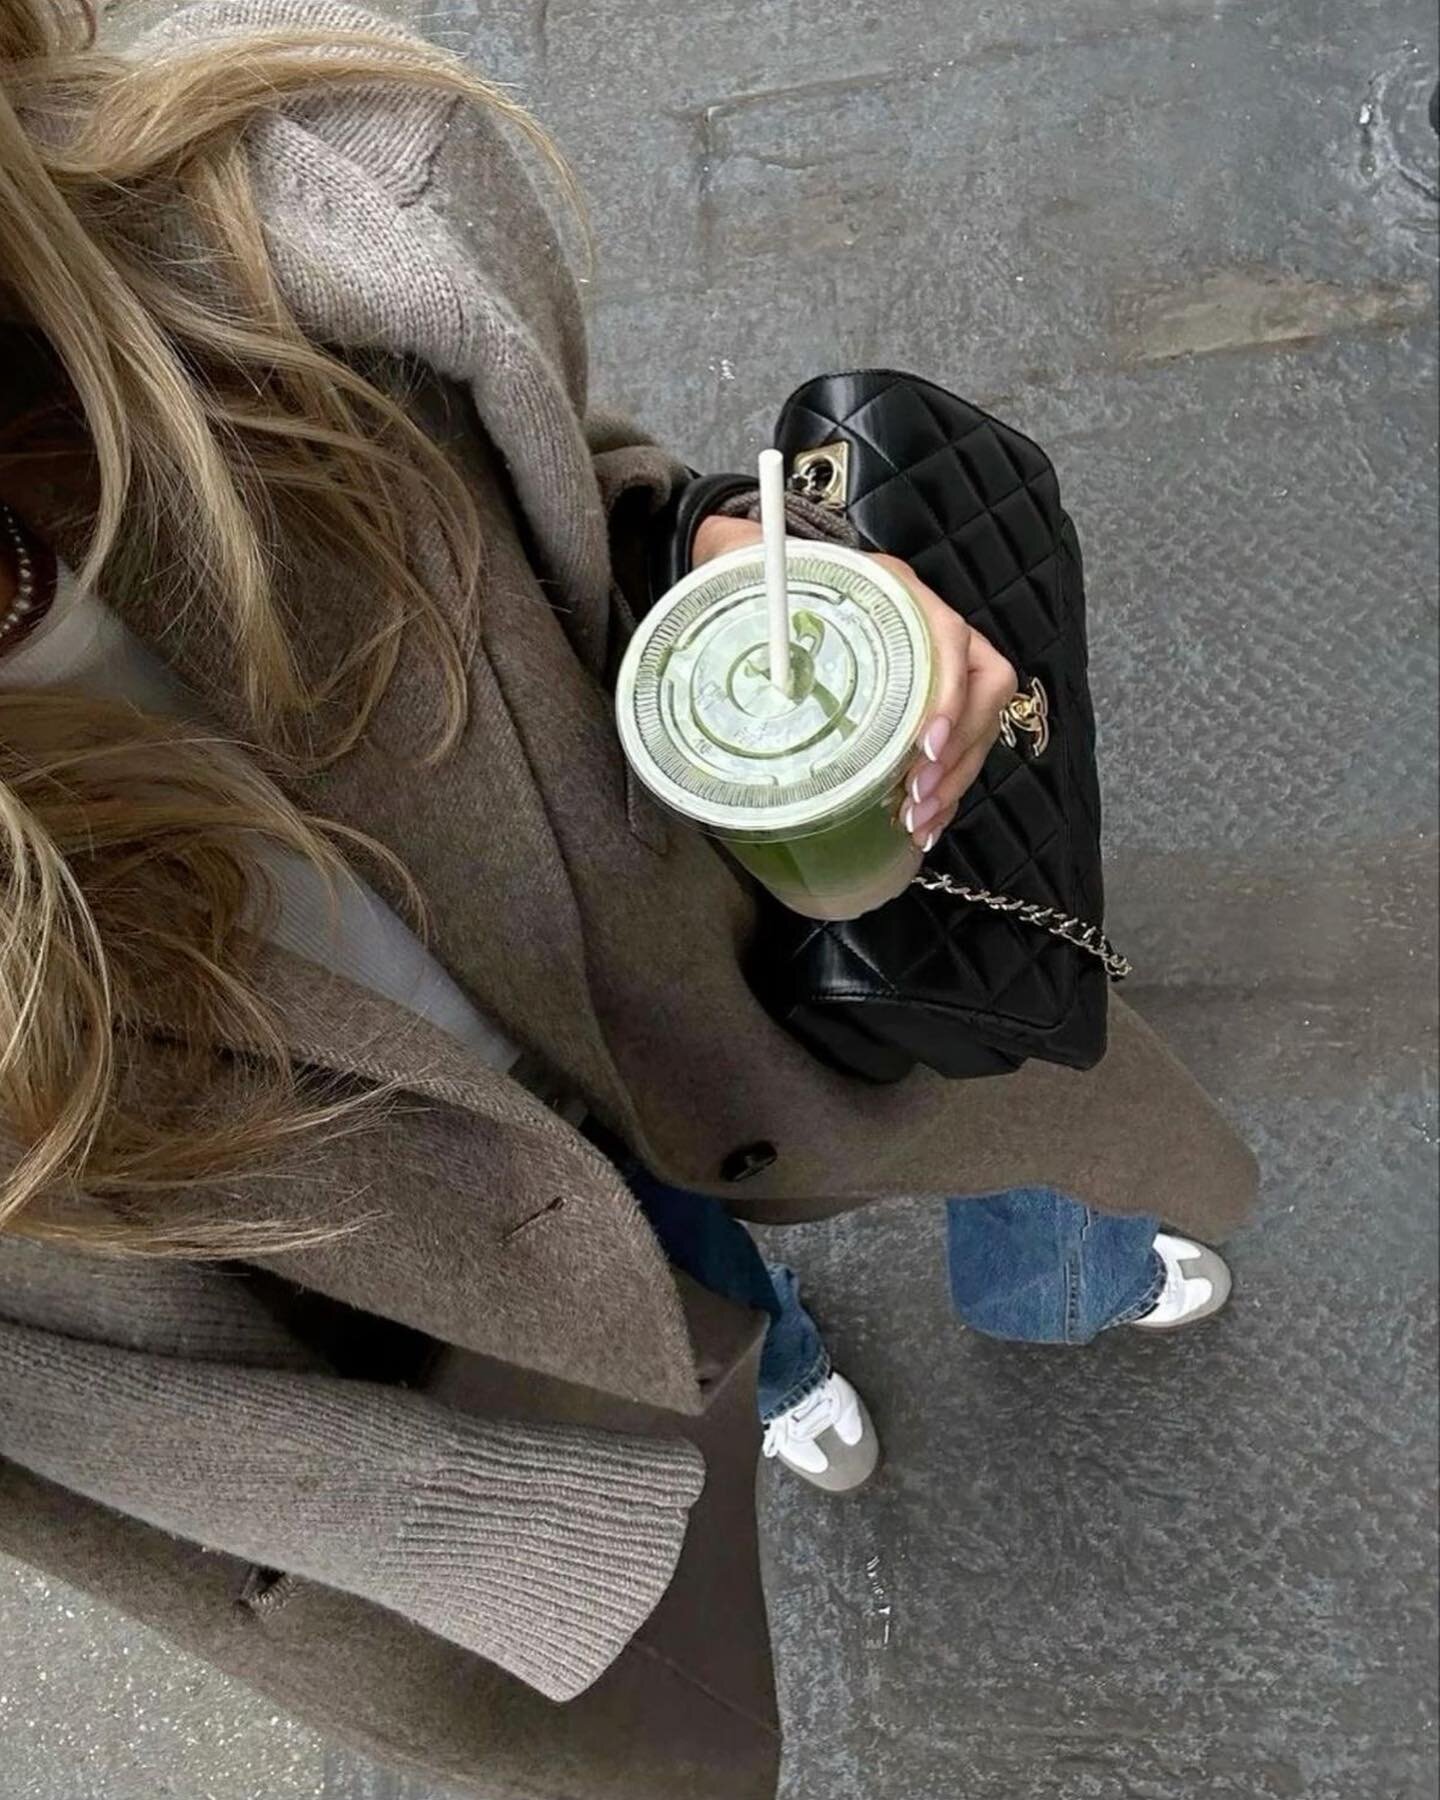 There's something about starting a cozy Fall morning with our oat hazelnut matcha 🍂🤎
.
Il y a quelque chose d'agr&eacute;able &agrave; commencer les matin&eacute;es d'automne avec notre matcha avoine-noisette 🍂🤎